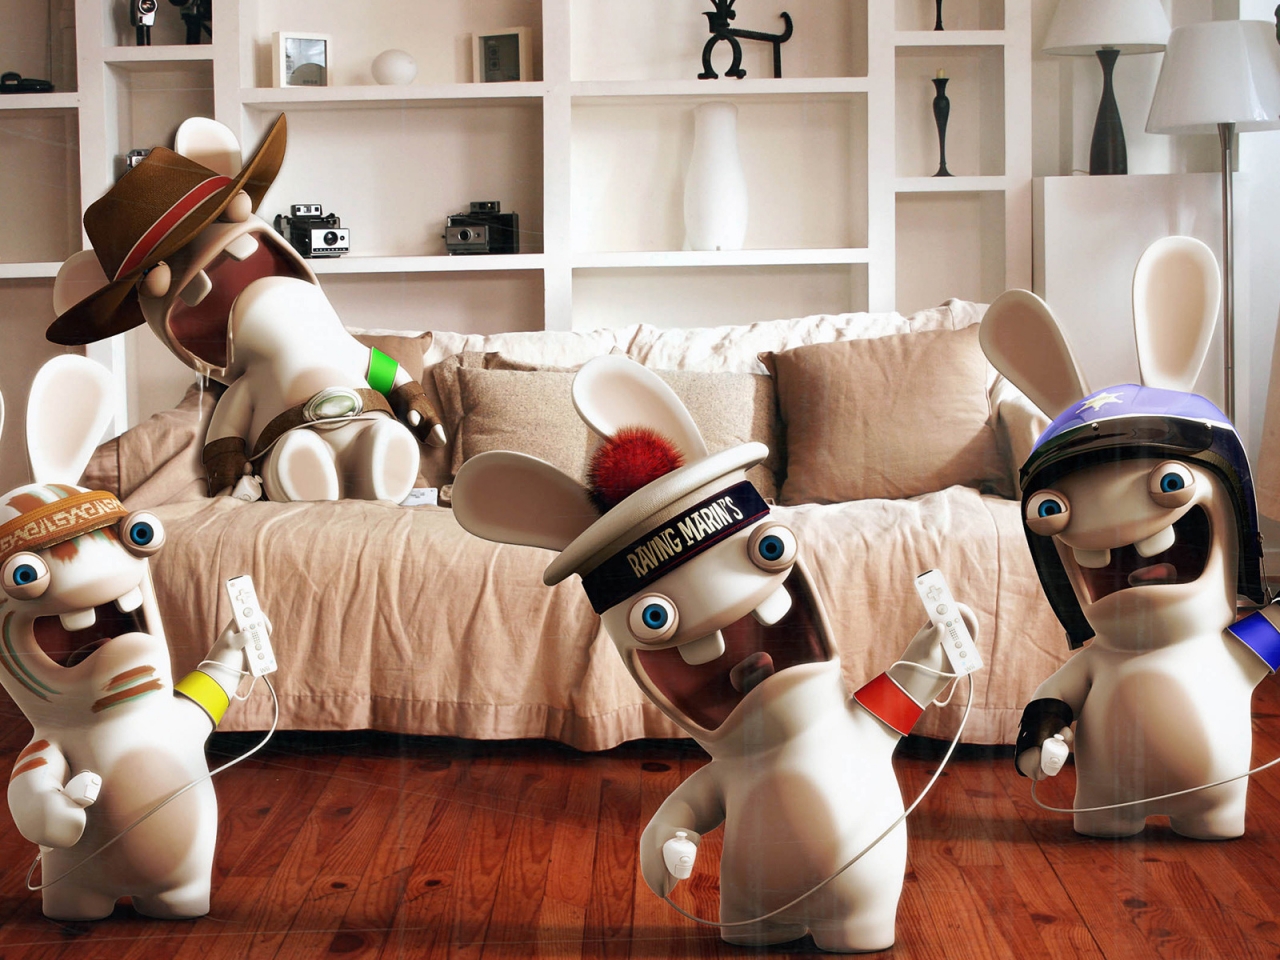 Rayman Raving Rabbids Playing Wii for 1280 x 960 resolution